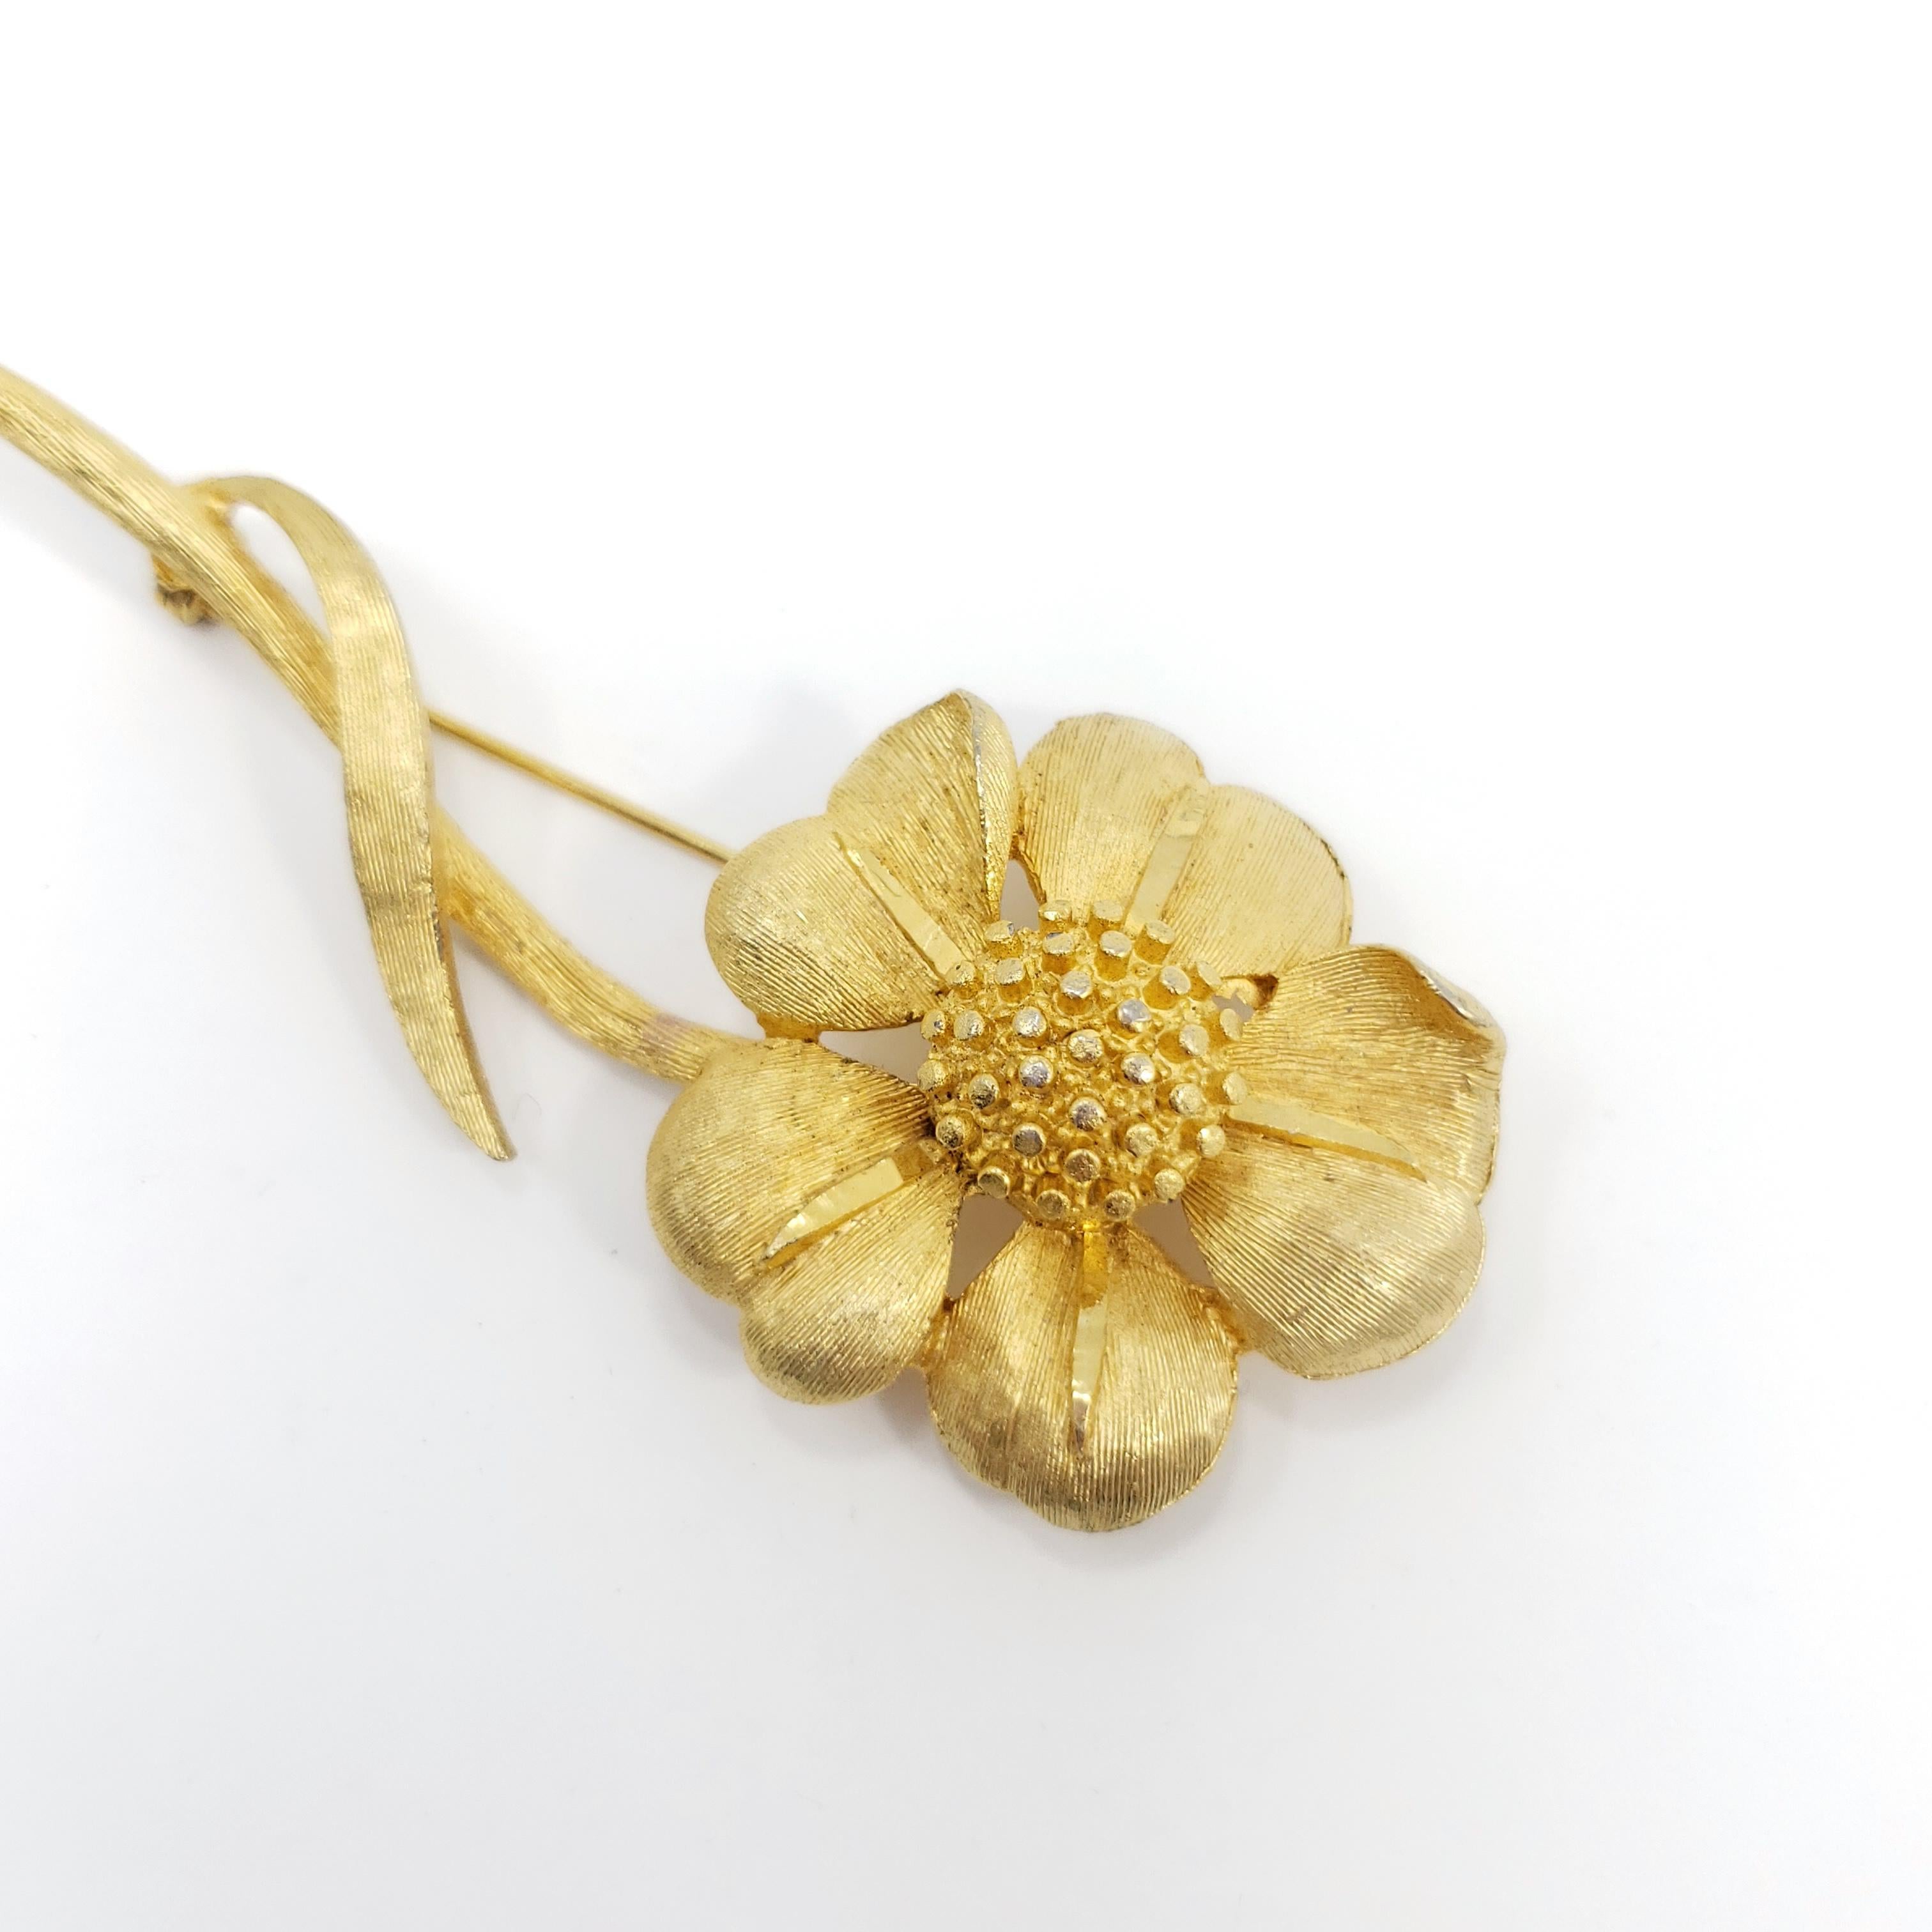 This golden flower is a perfect touch of elegance and beauty! 

By BSK, a fashion jewelry company formed in New York in 1948.

Gold-filled. Vintage collector's piece, wonderfully preserved.

Marks / hallmarks: BSK